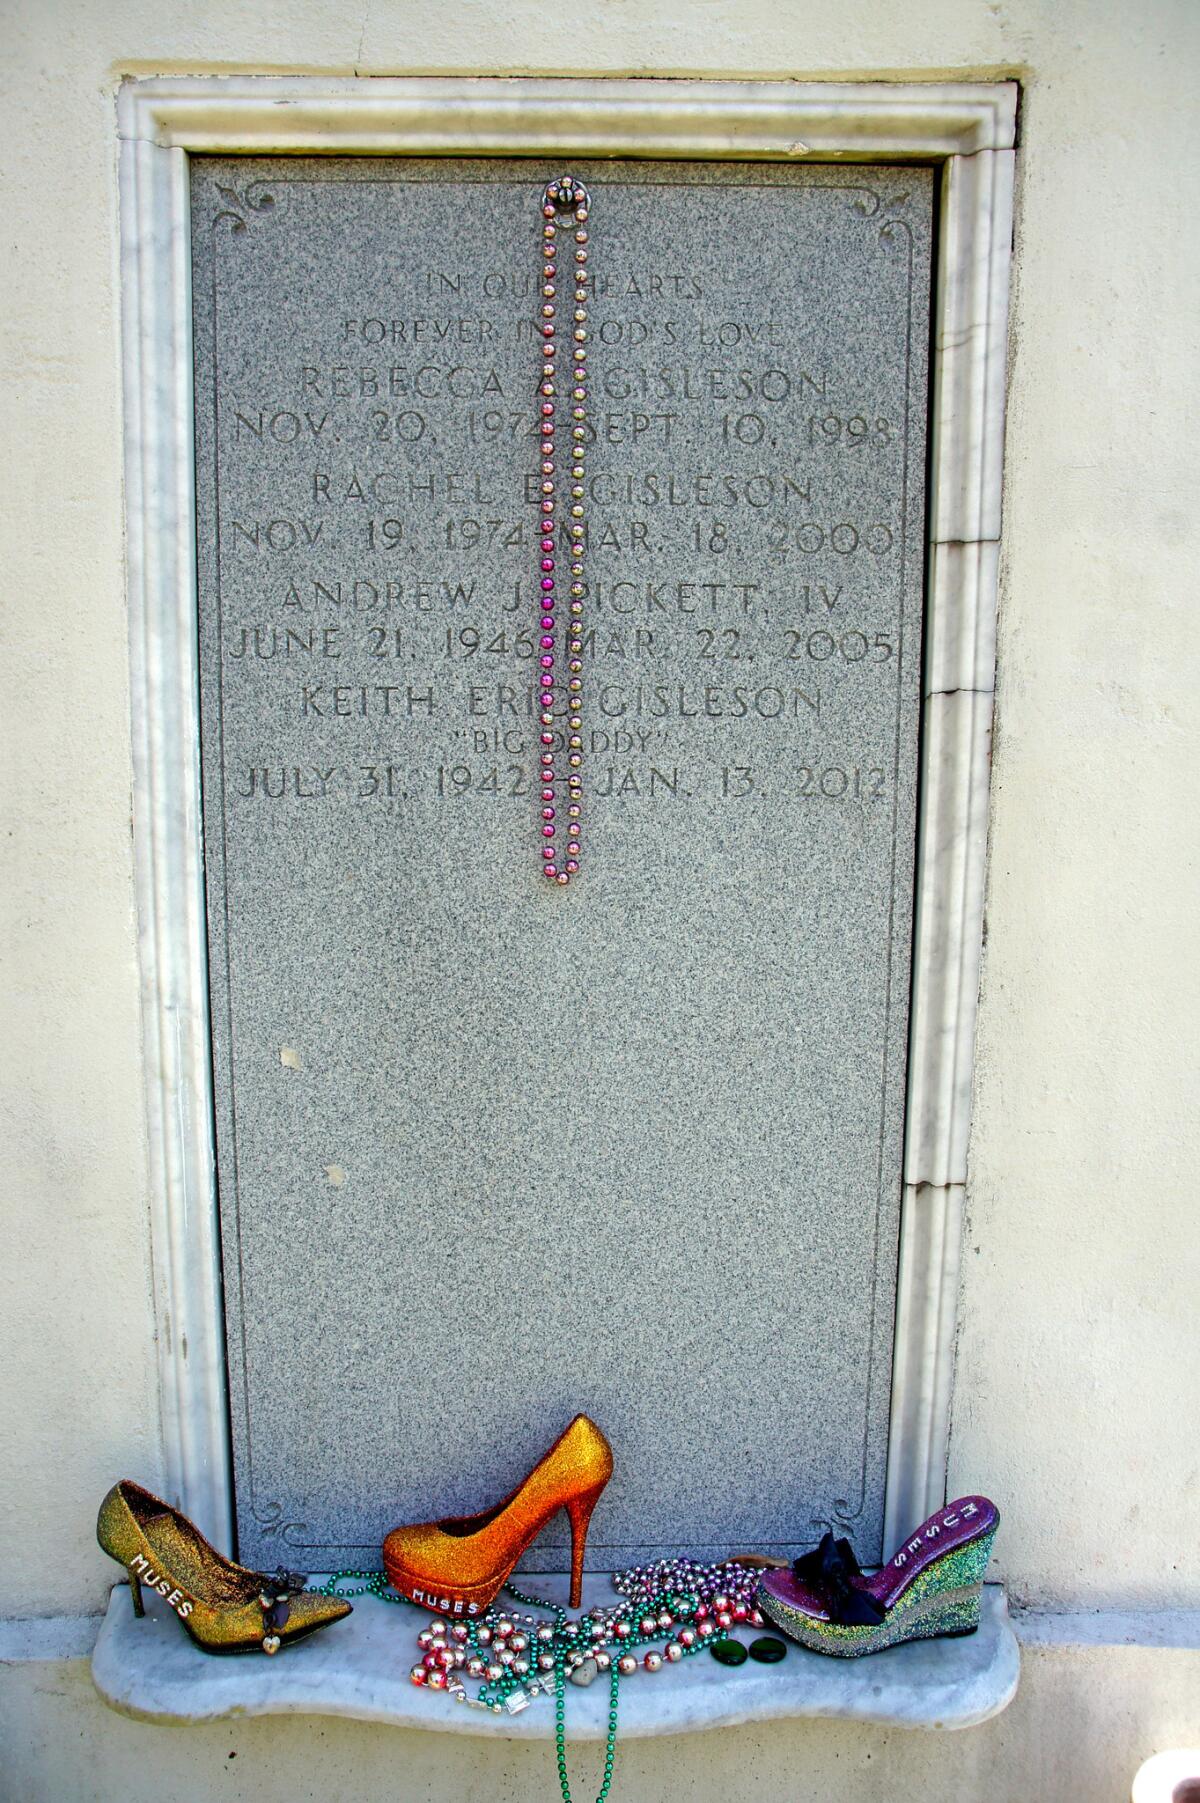 Beads and shoes thrown from the women's Carnival krewe of Muses adorn this tomb in Lafayette Cemetery No. 1 in New Orleans.